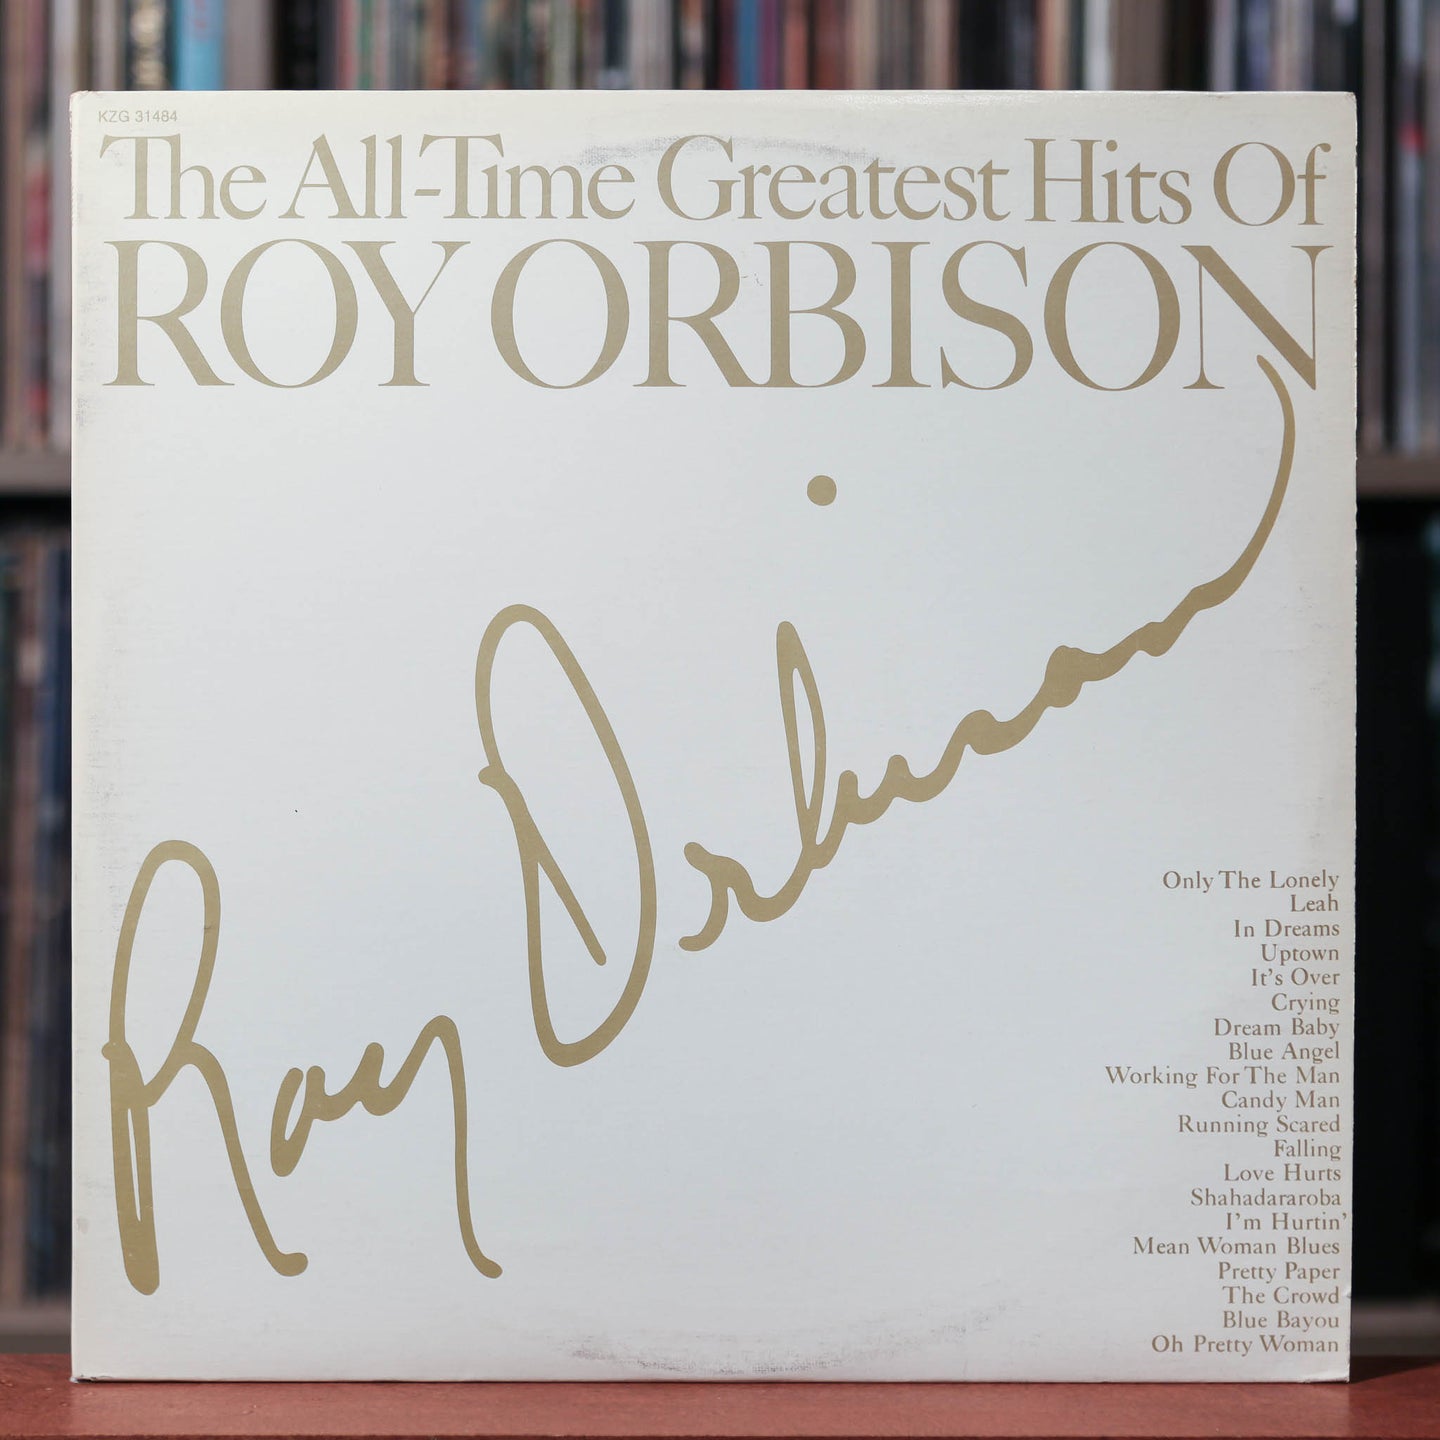 Roy Orbison - 2 LP - The All Time Greatest Hits Of Roy Orbison - Canada Import - 1972 Monument, VG/VG